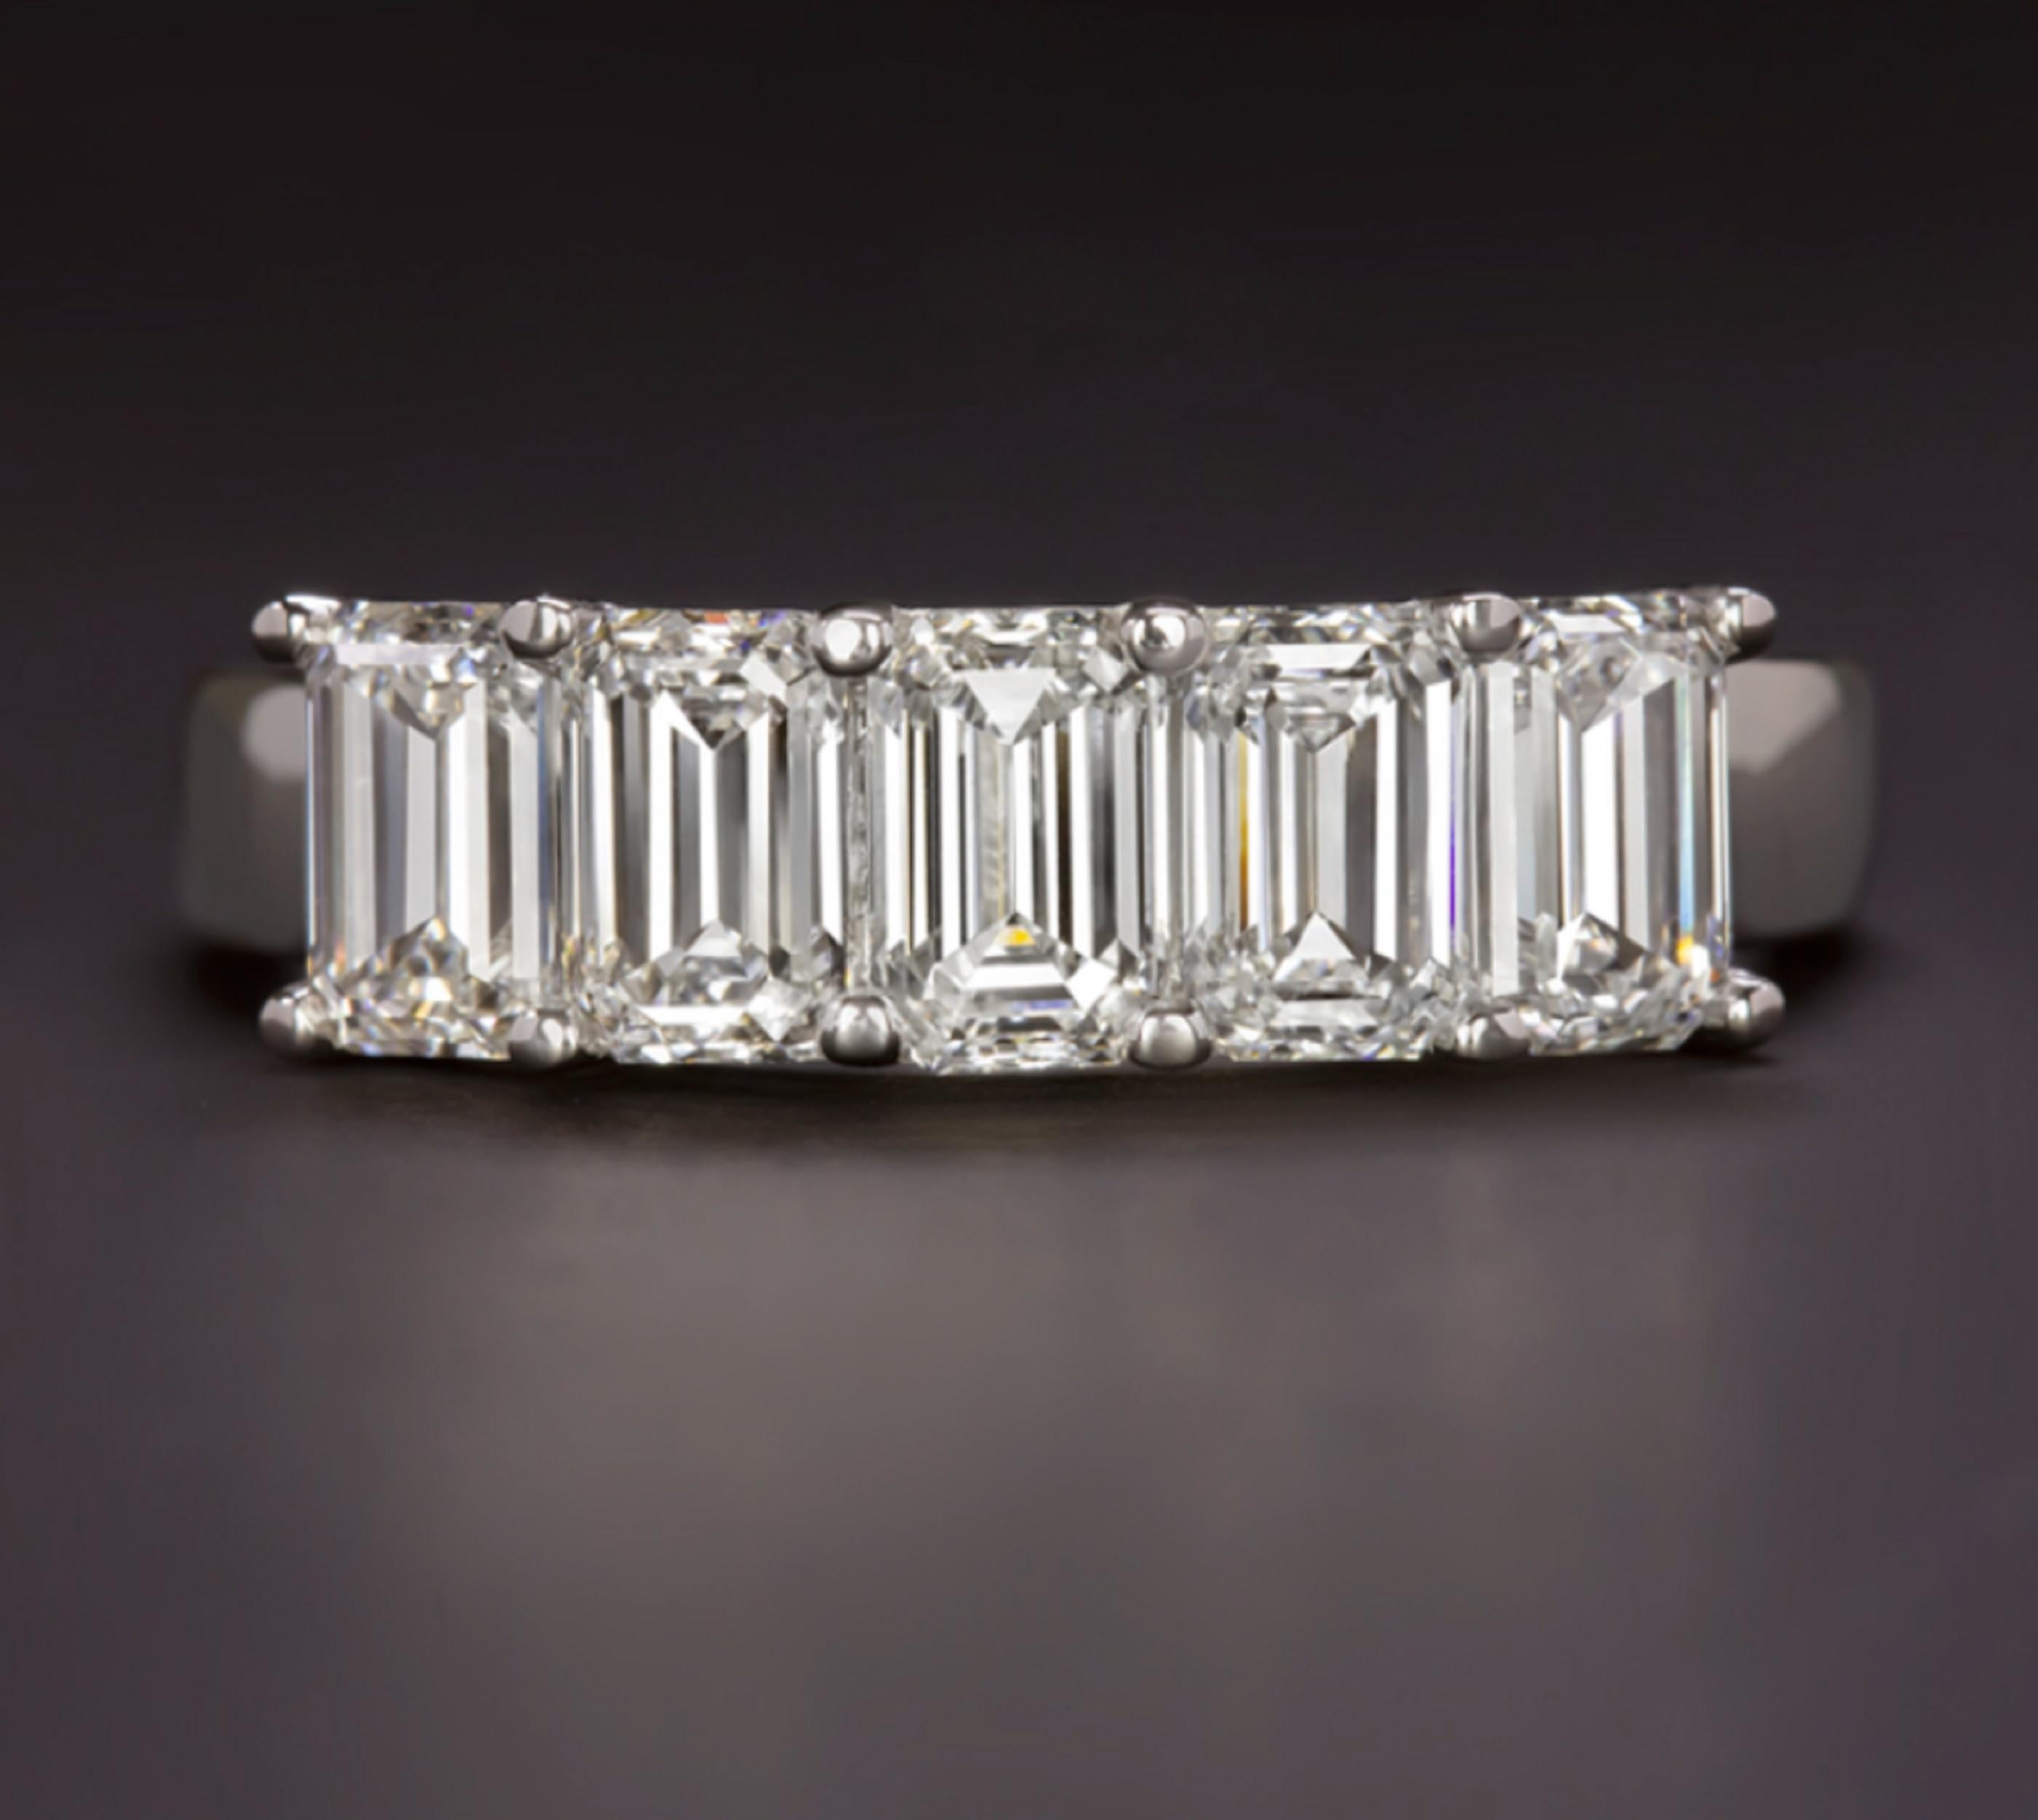  striking ring features 2 carat of vibrant emerald cut diamonds set in an elegantly simple modern band. Five high quality, perfectly matched, and substantially sized diamonds cover the face of the ring in dazzling sparkle. Bright white and